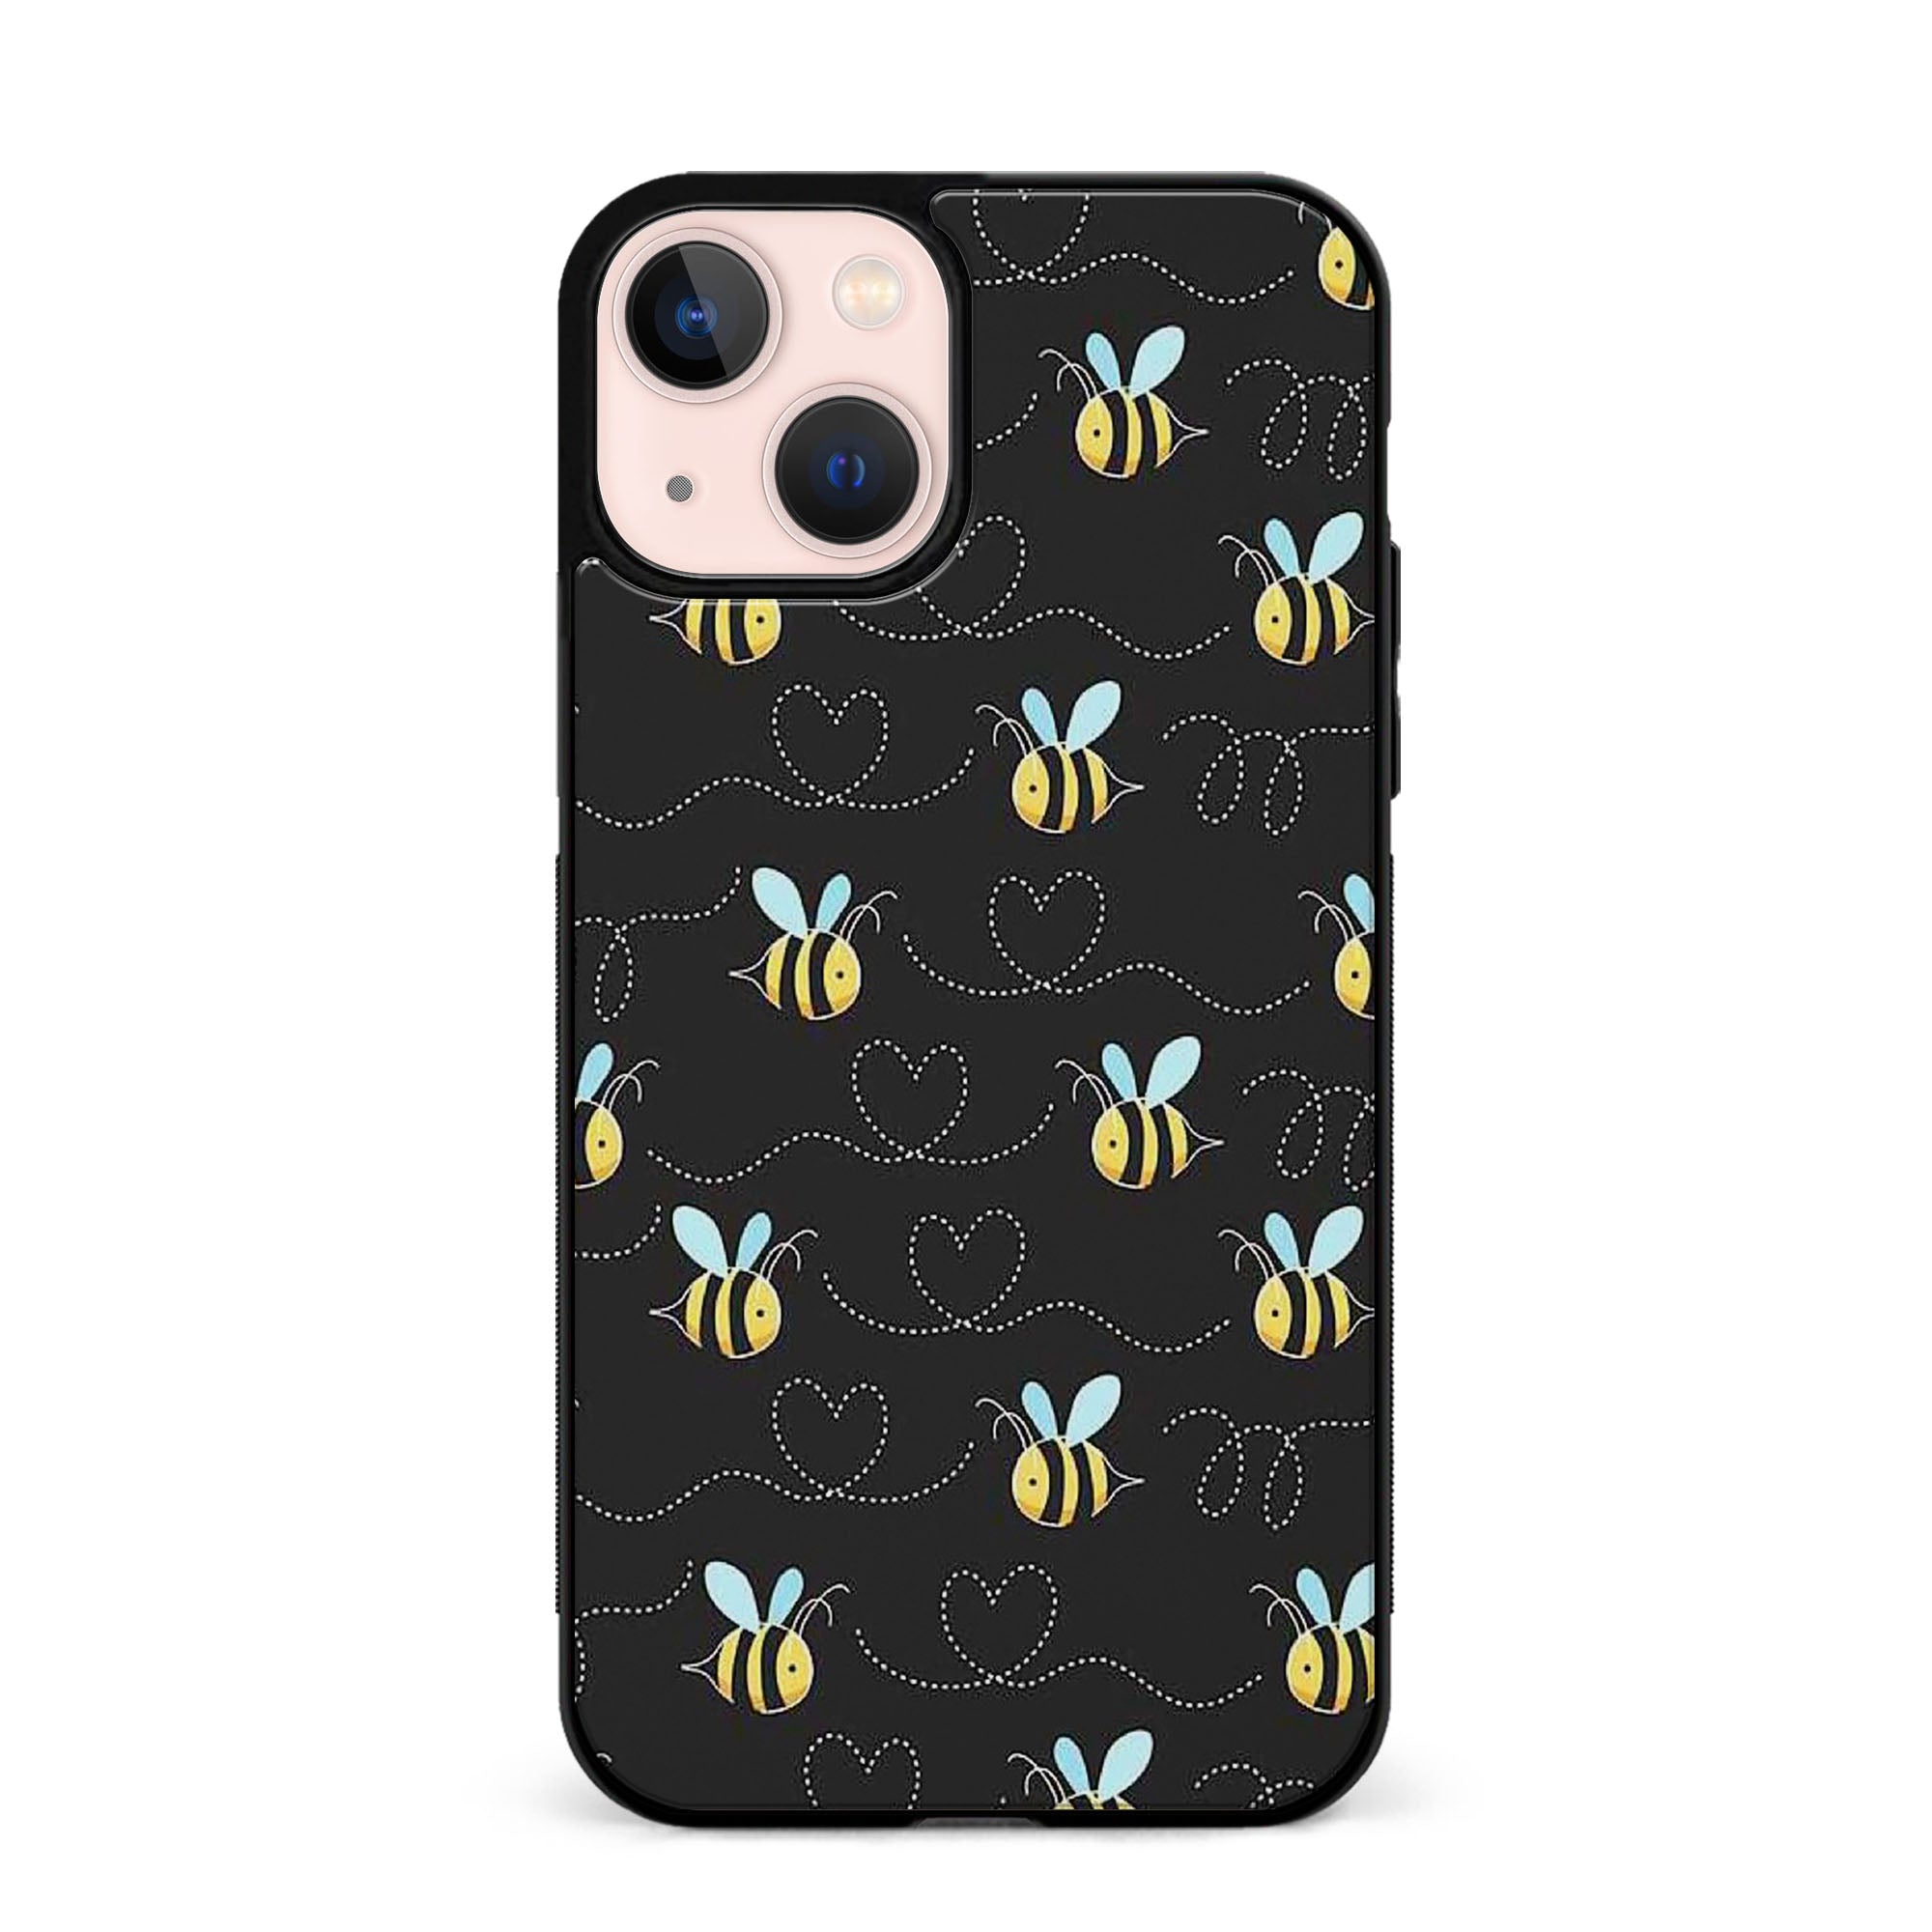 Bees & Hearts Rubber Phone Case for iPhone, Samsung, Huawei & Pixel